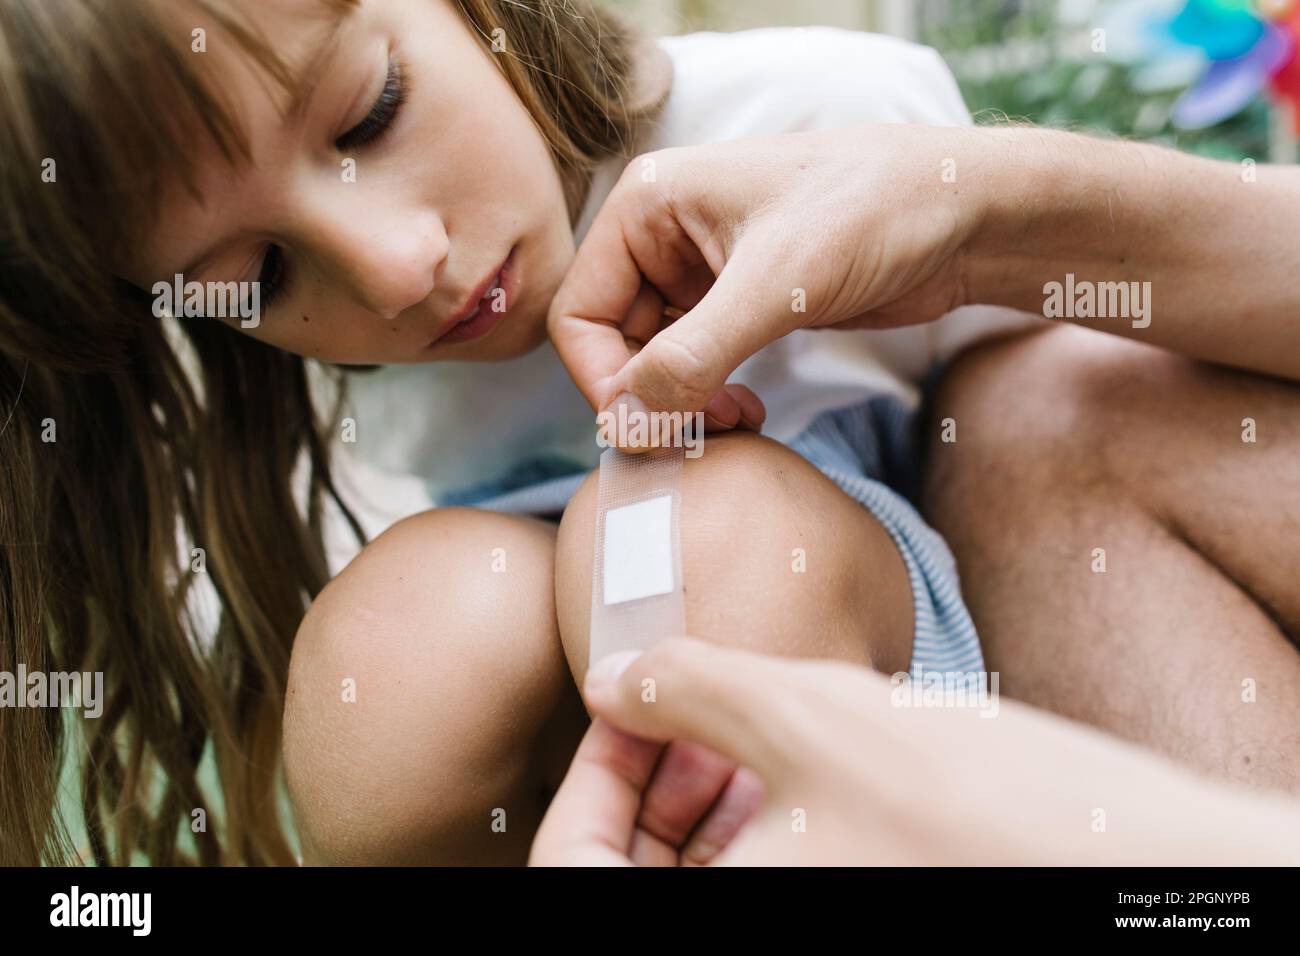 Father applying bandage on daughters knee Stock Photo